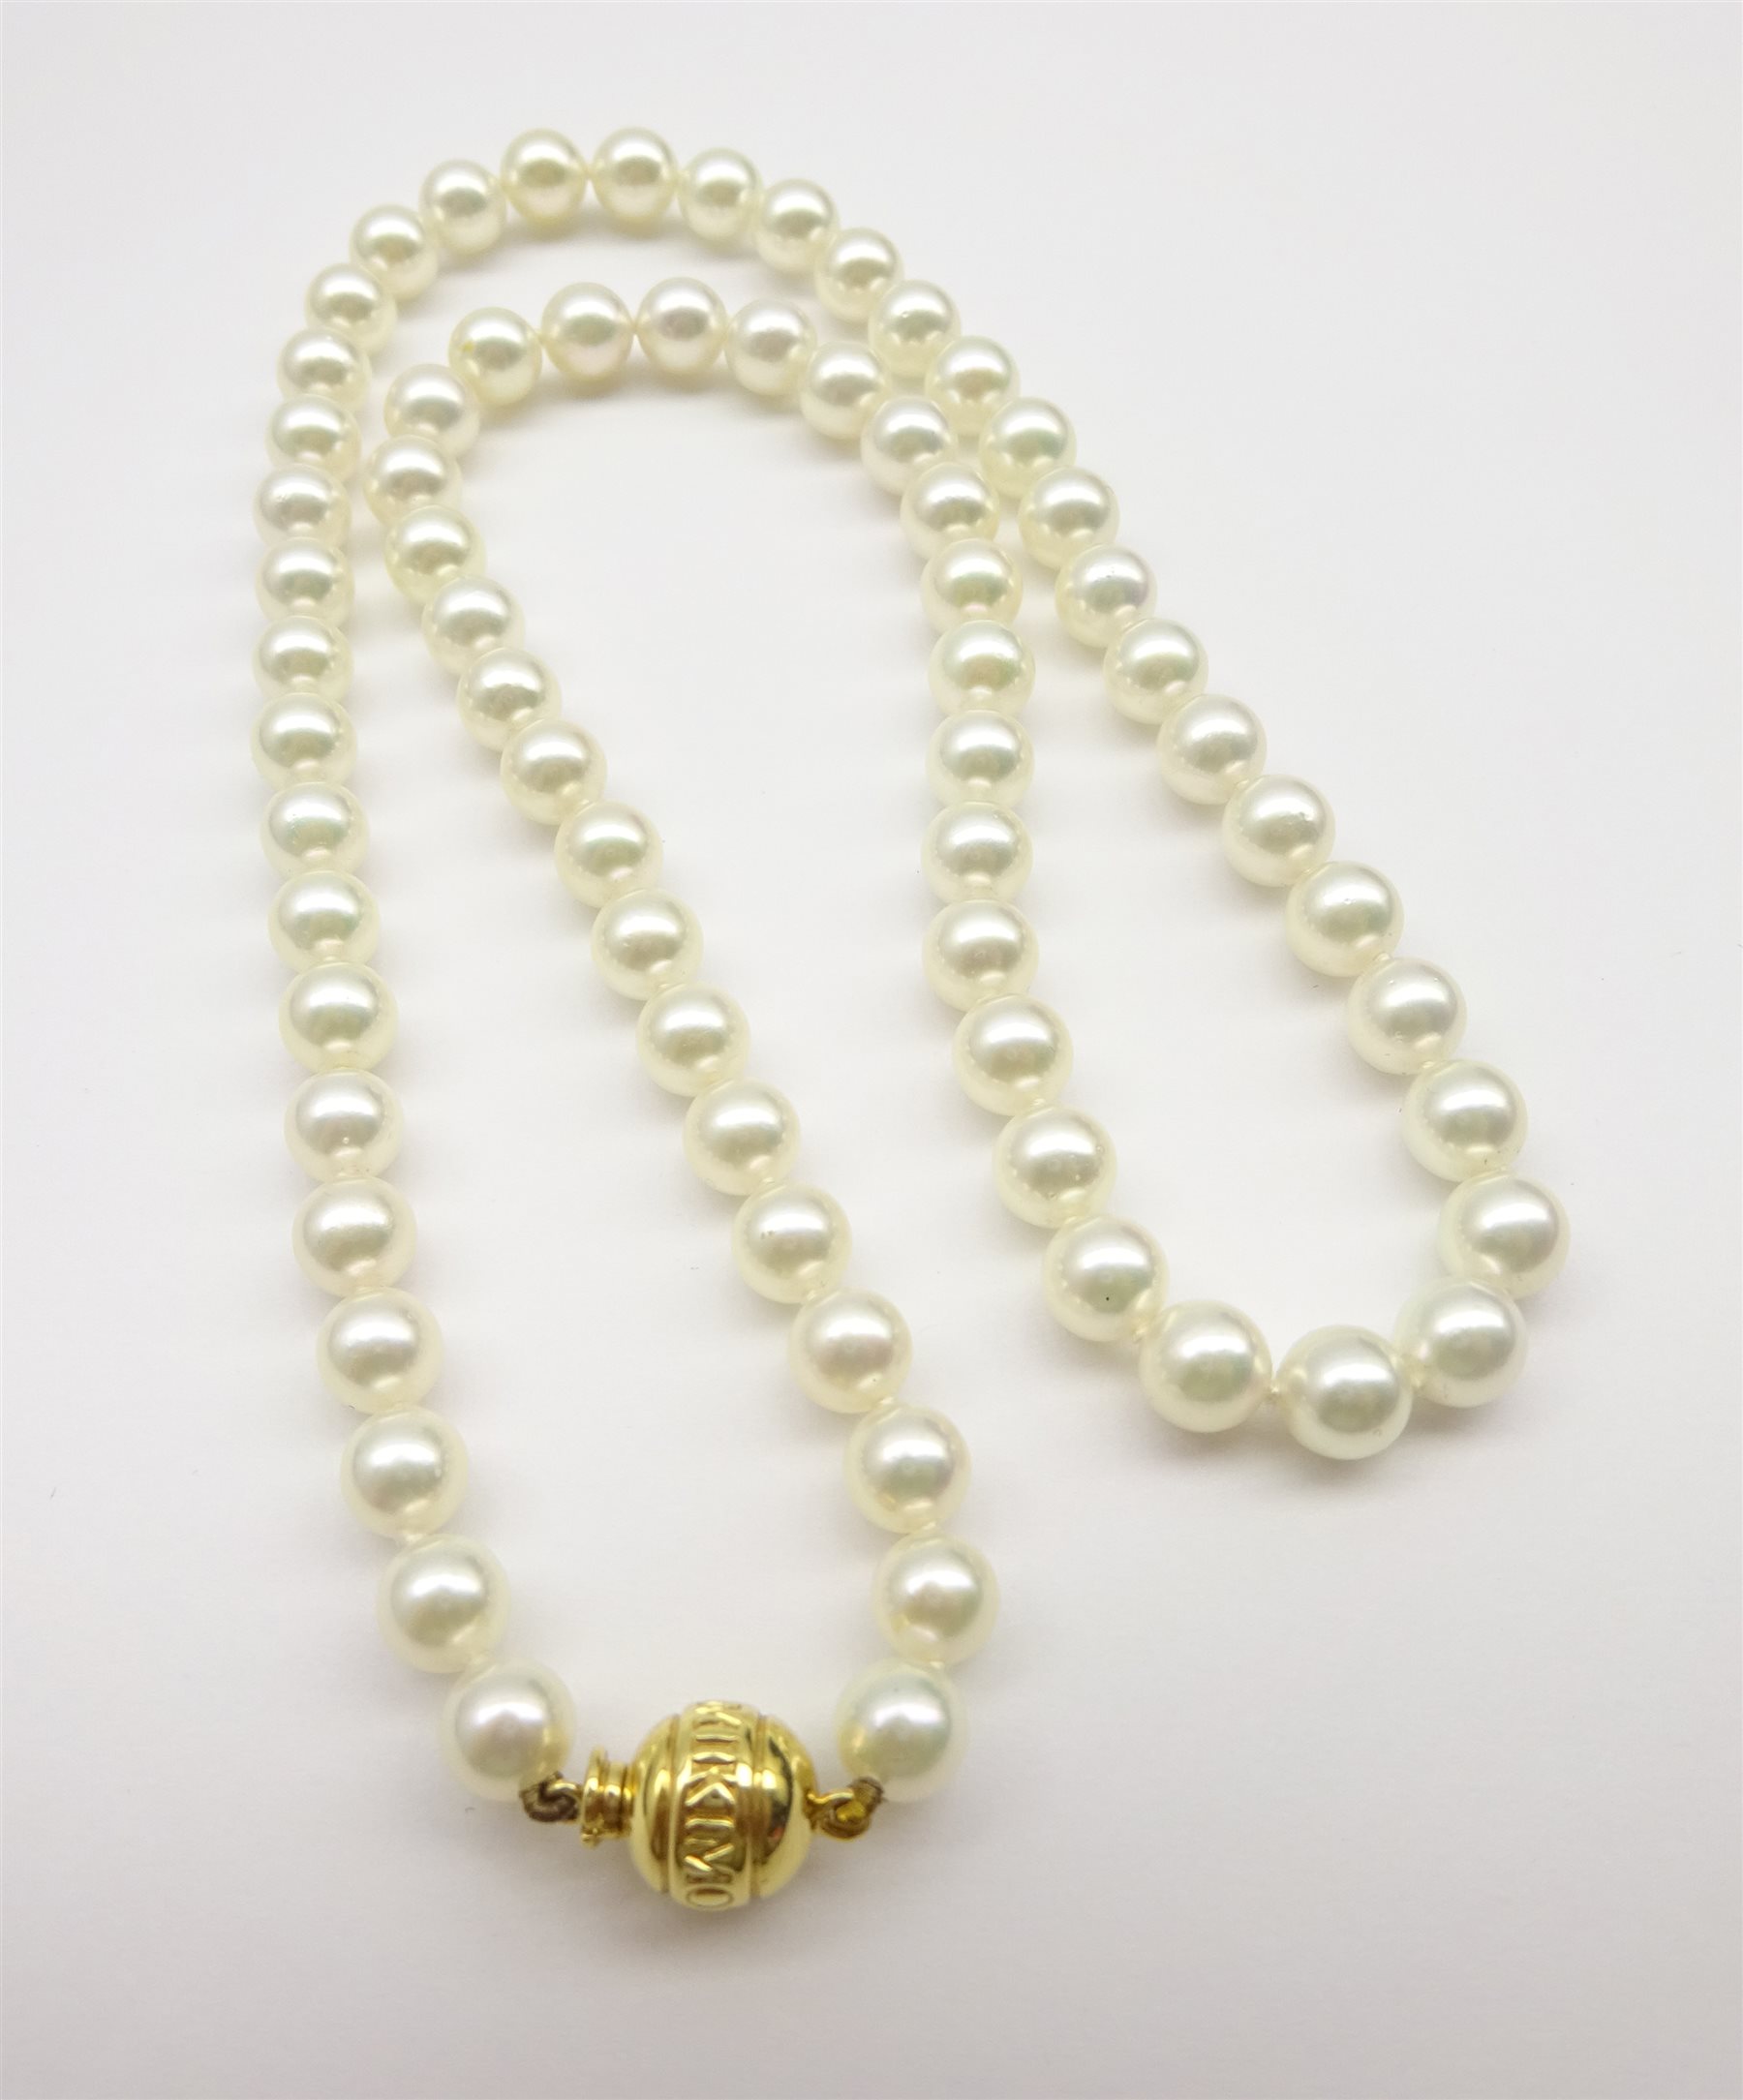 Mikimoto uniform cultured 68 pearl necklace, each pearl 6.5 x 6mm, with